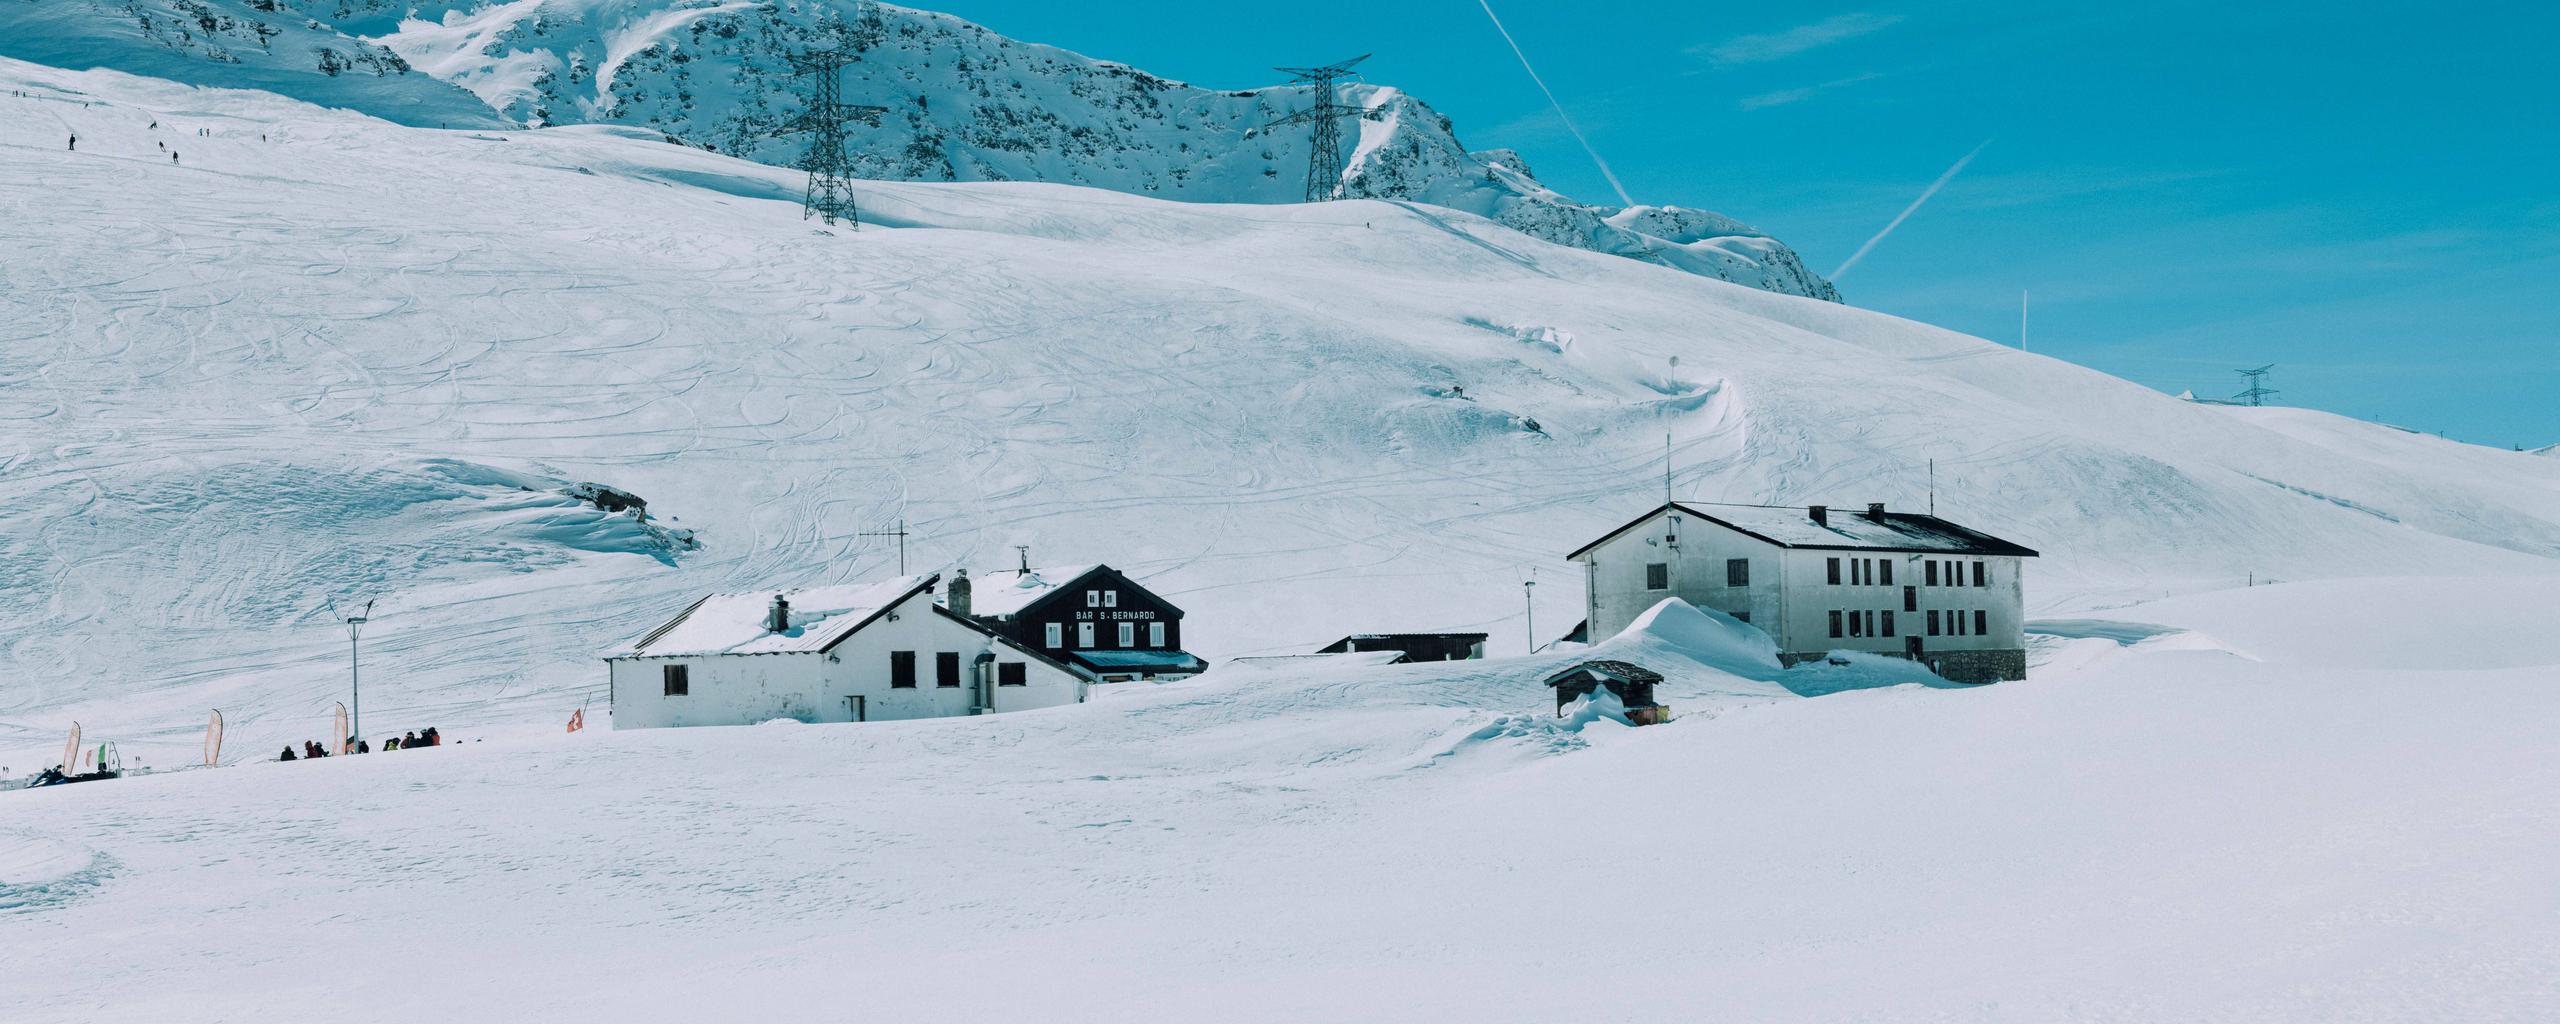 Chalets in snowy mountainside in French Alps